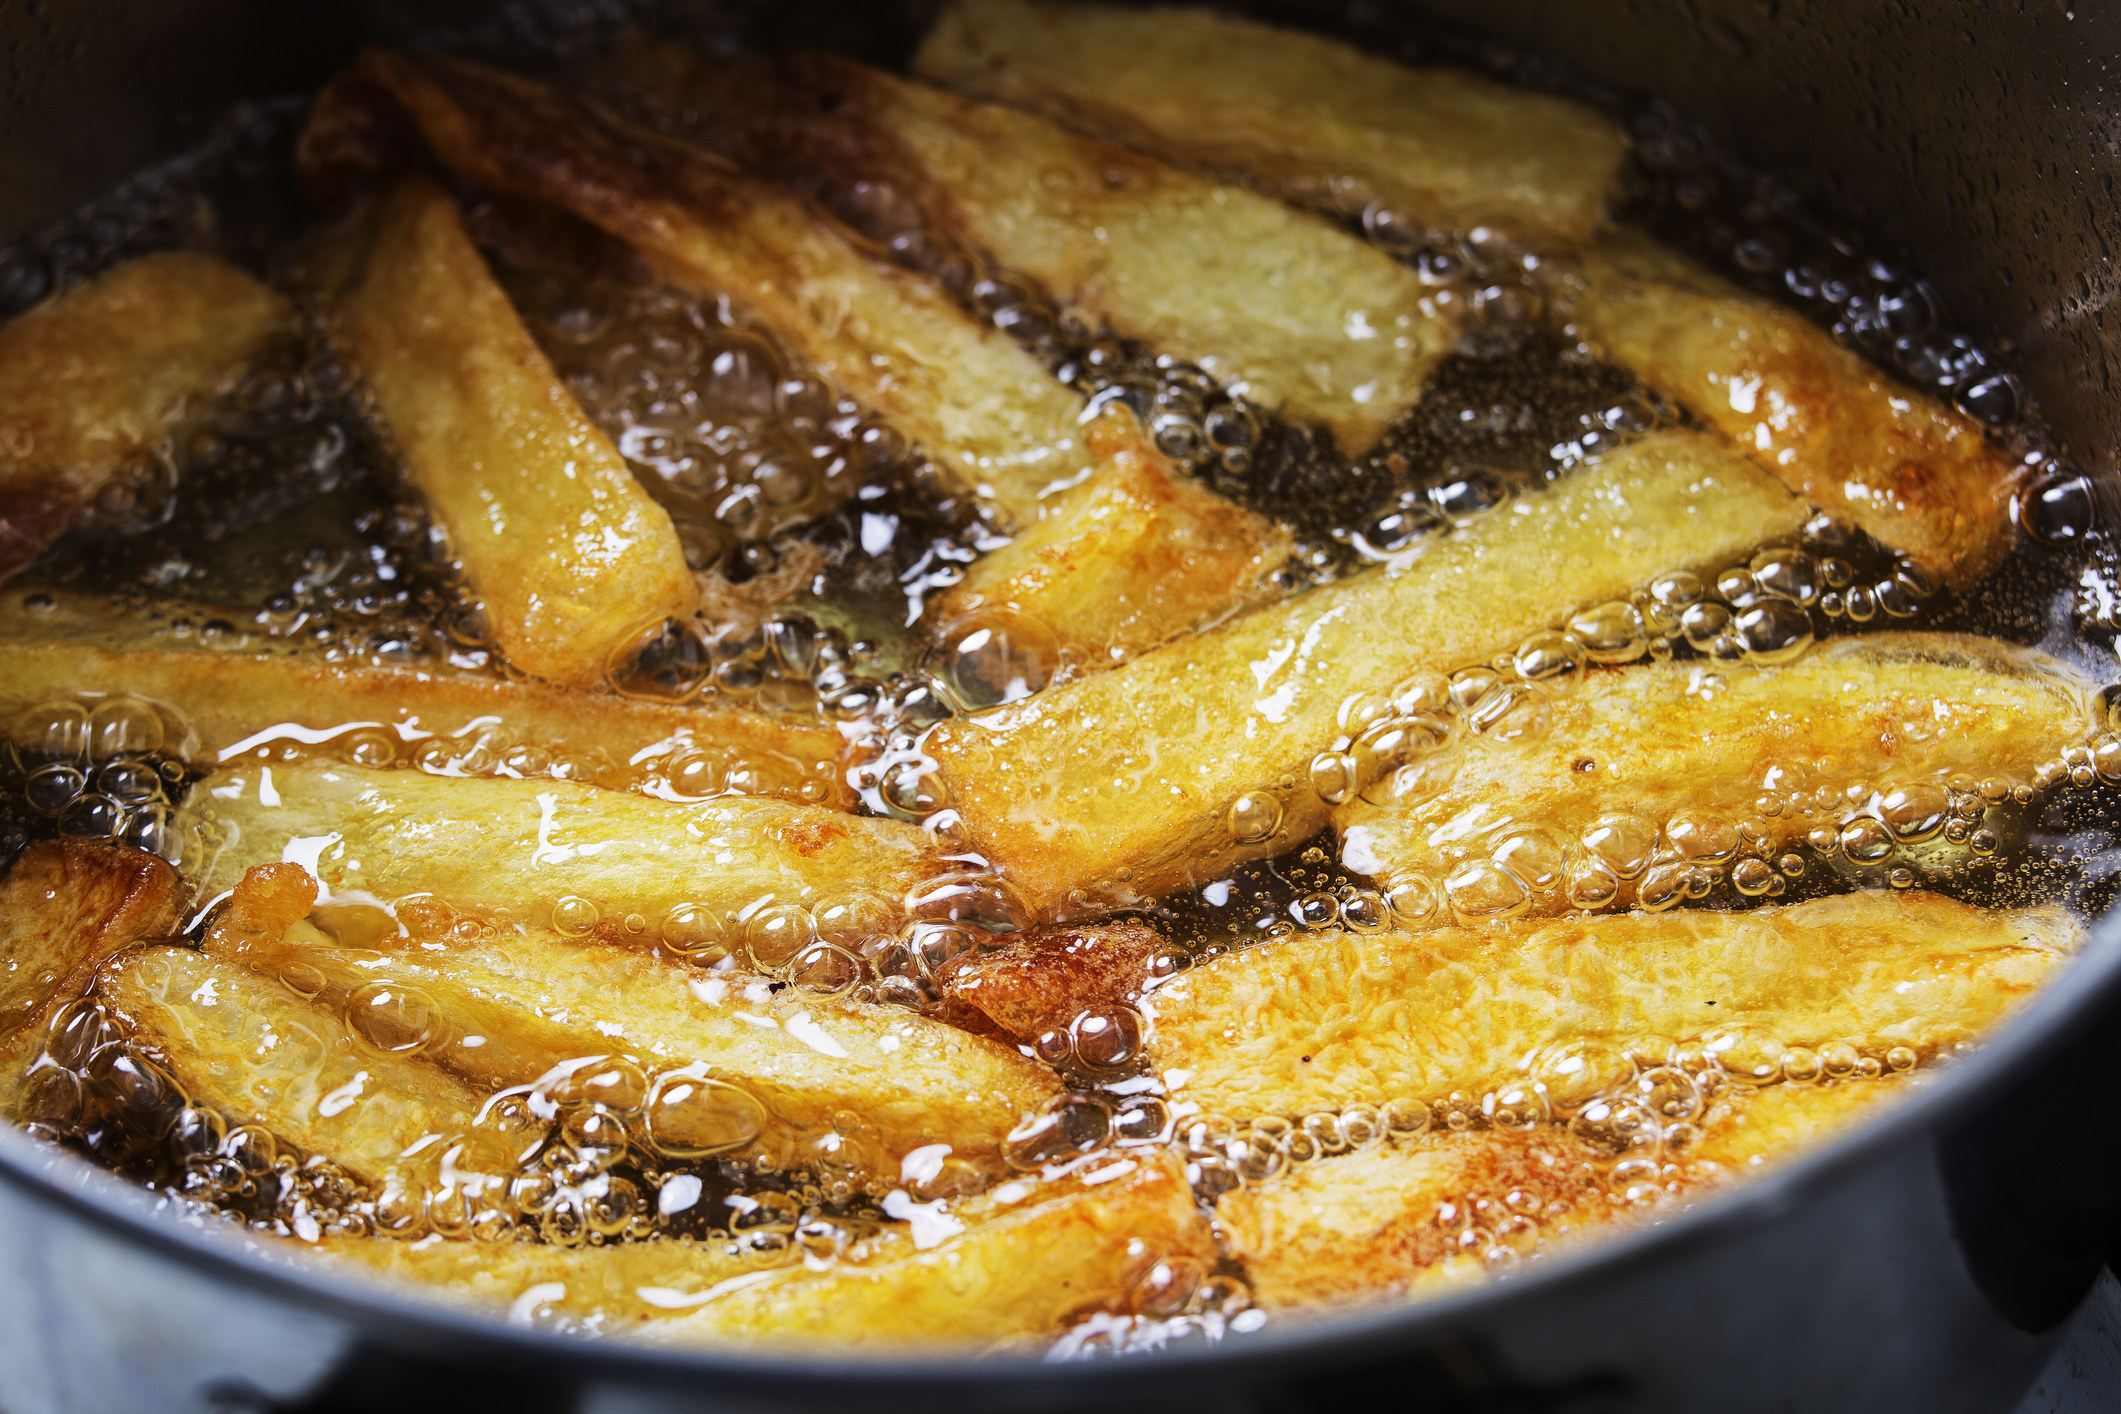 French fries frying in oil.